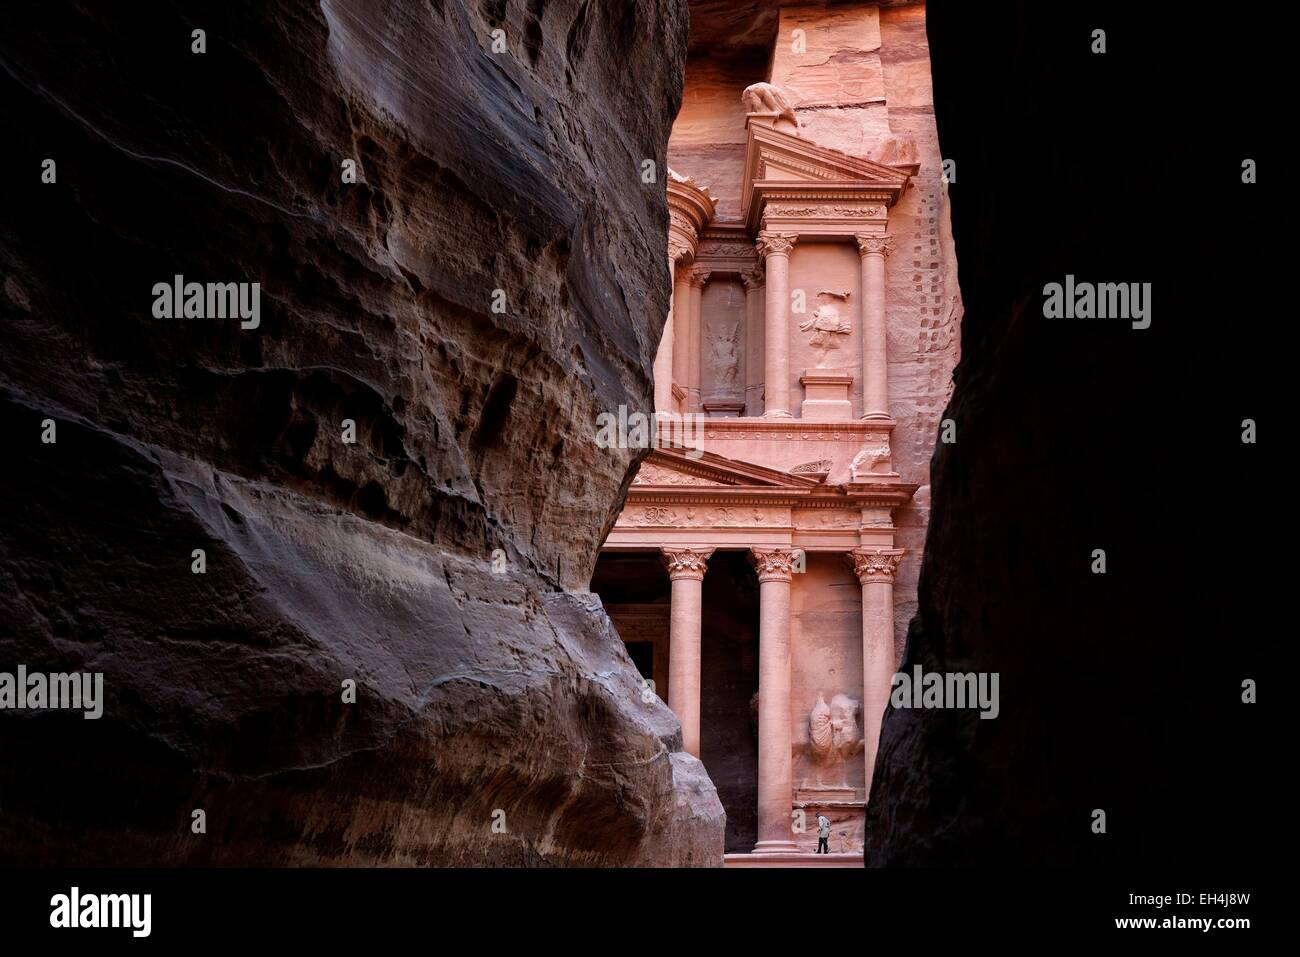 Jordan, Nabataean archeological site of Petra, listed as World Heritage by UNESCO, the famous and elaborately carved façade of Al Khazneh (the Treasury), carved out of a sandstone rock face, viewed from the end of the Siq Stock Photo